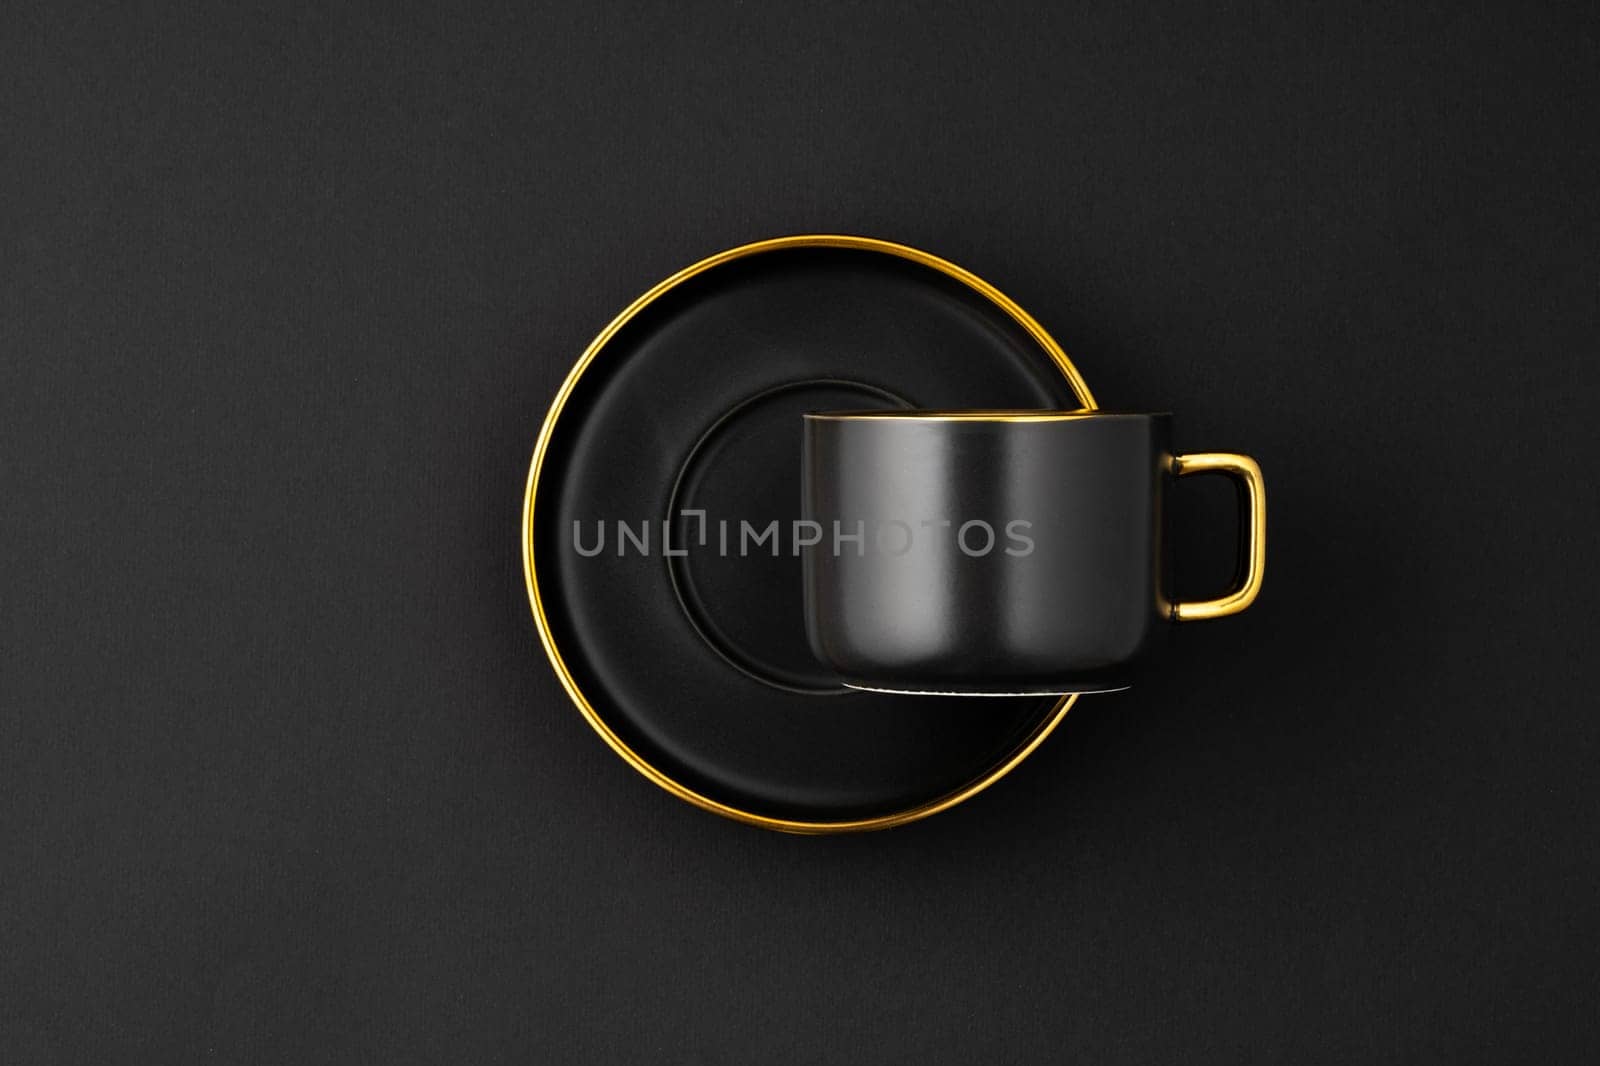 A set of black and golden ceramic plates and cup on a black background. Top view by A_Karim